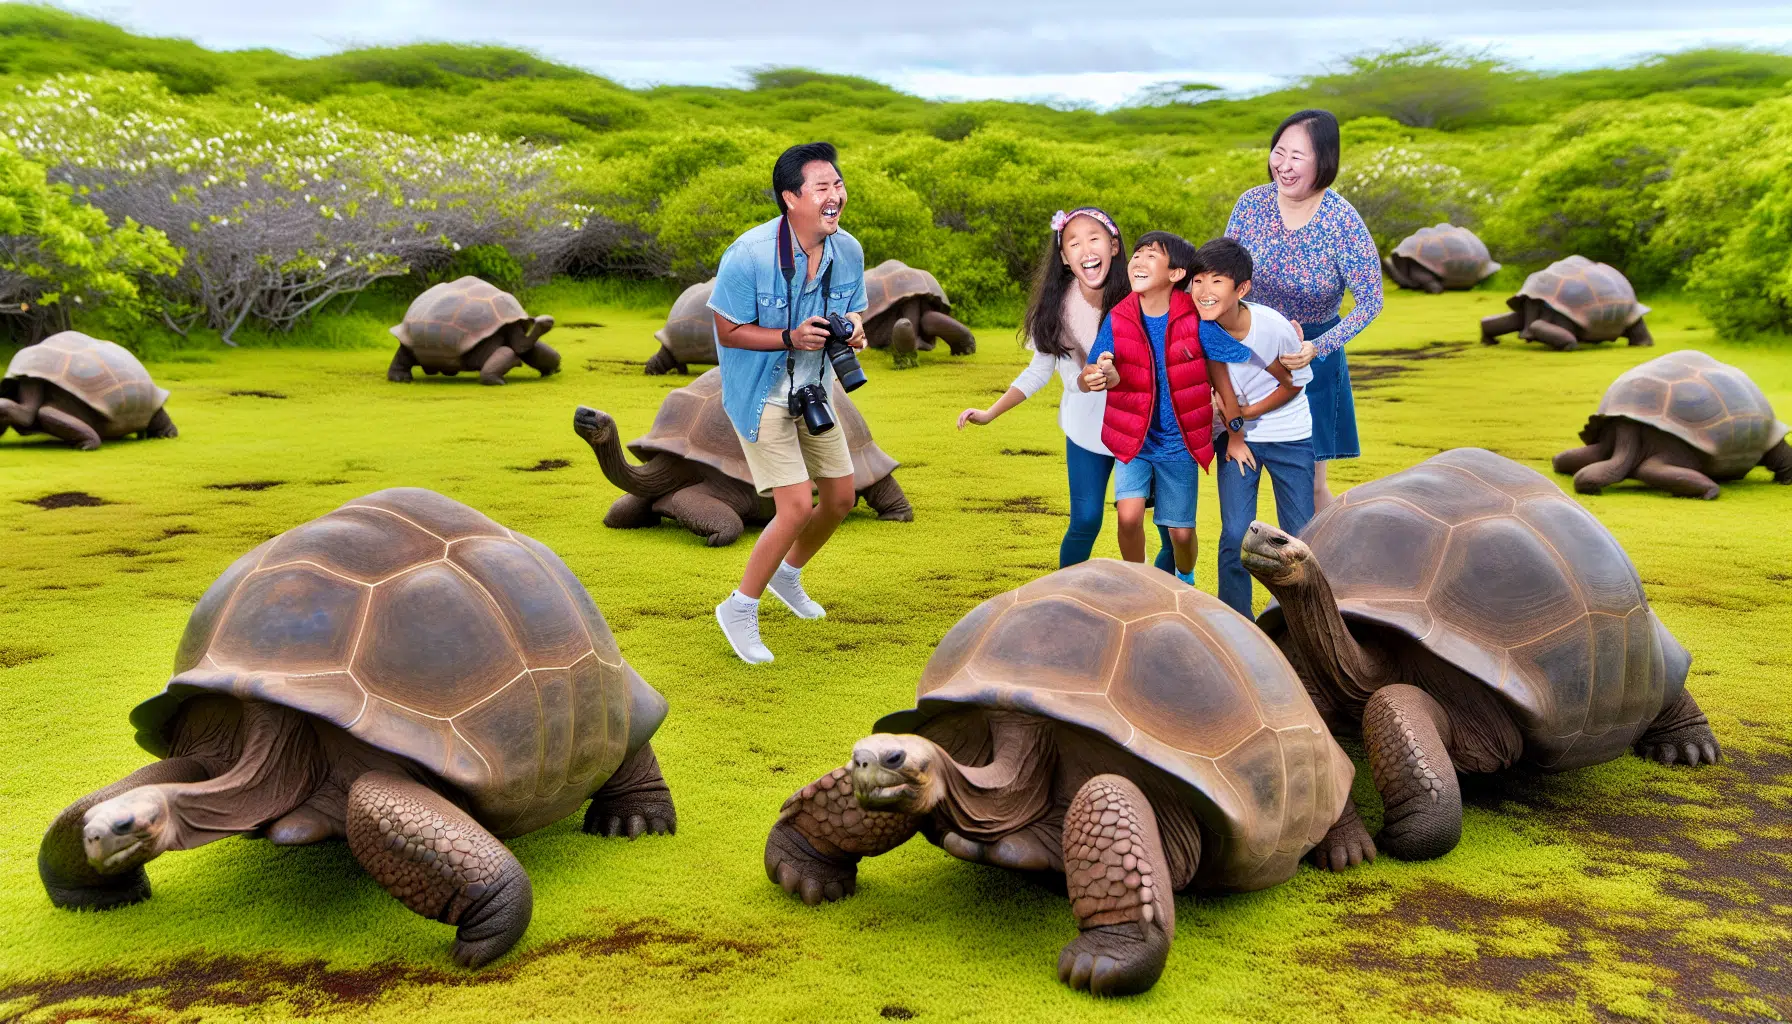 Family taking a group photo with giant tortoises in the Galapagos